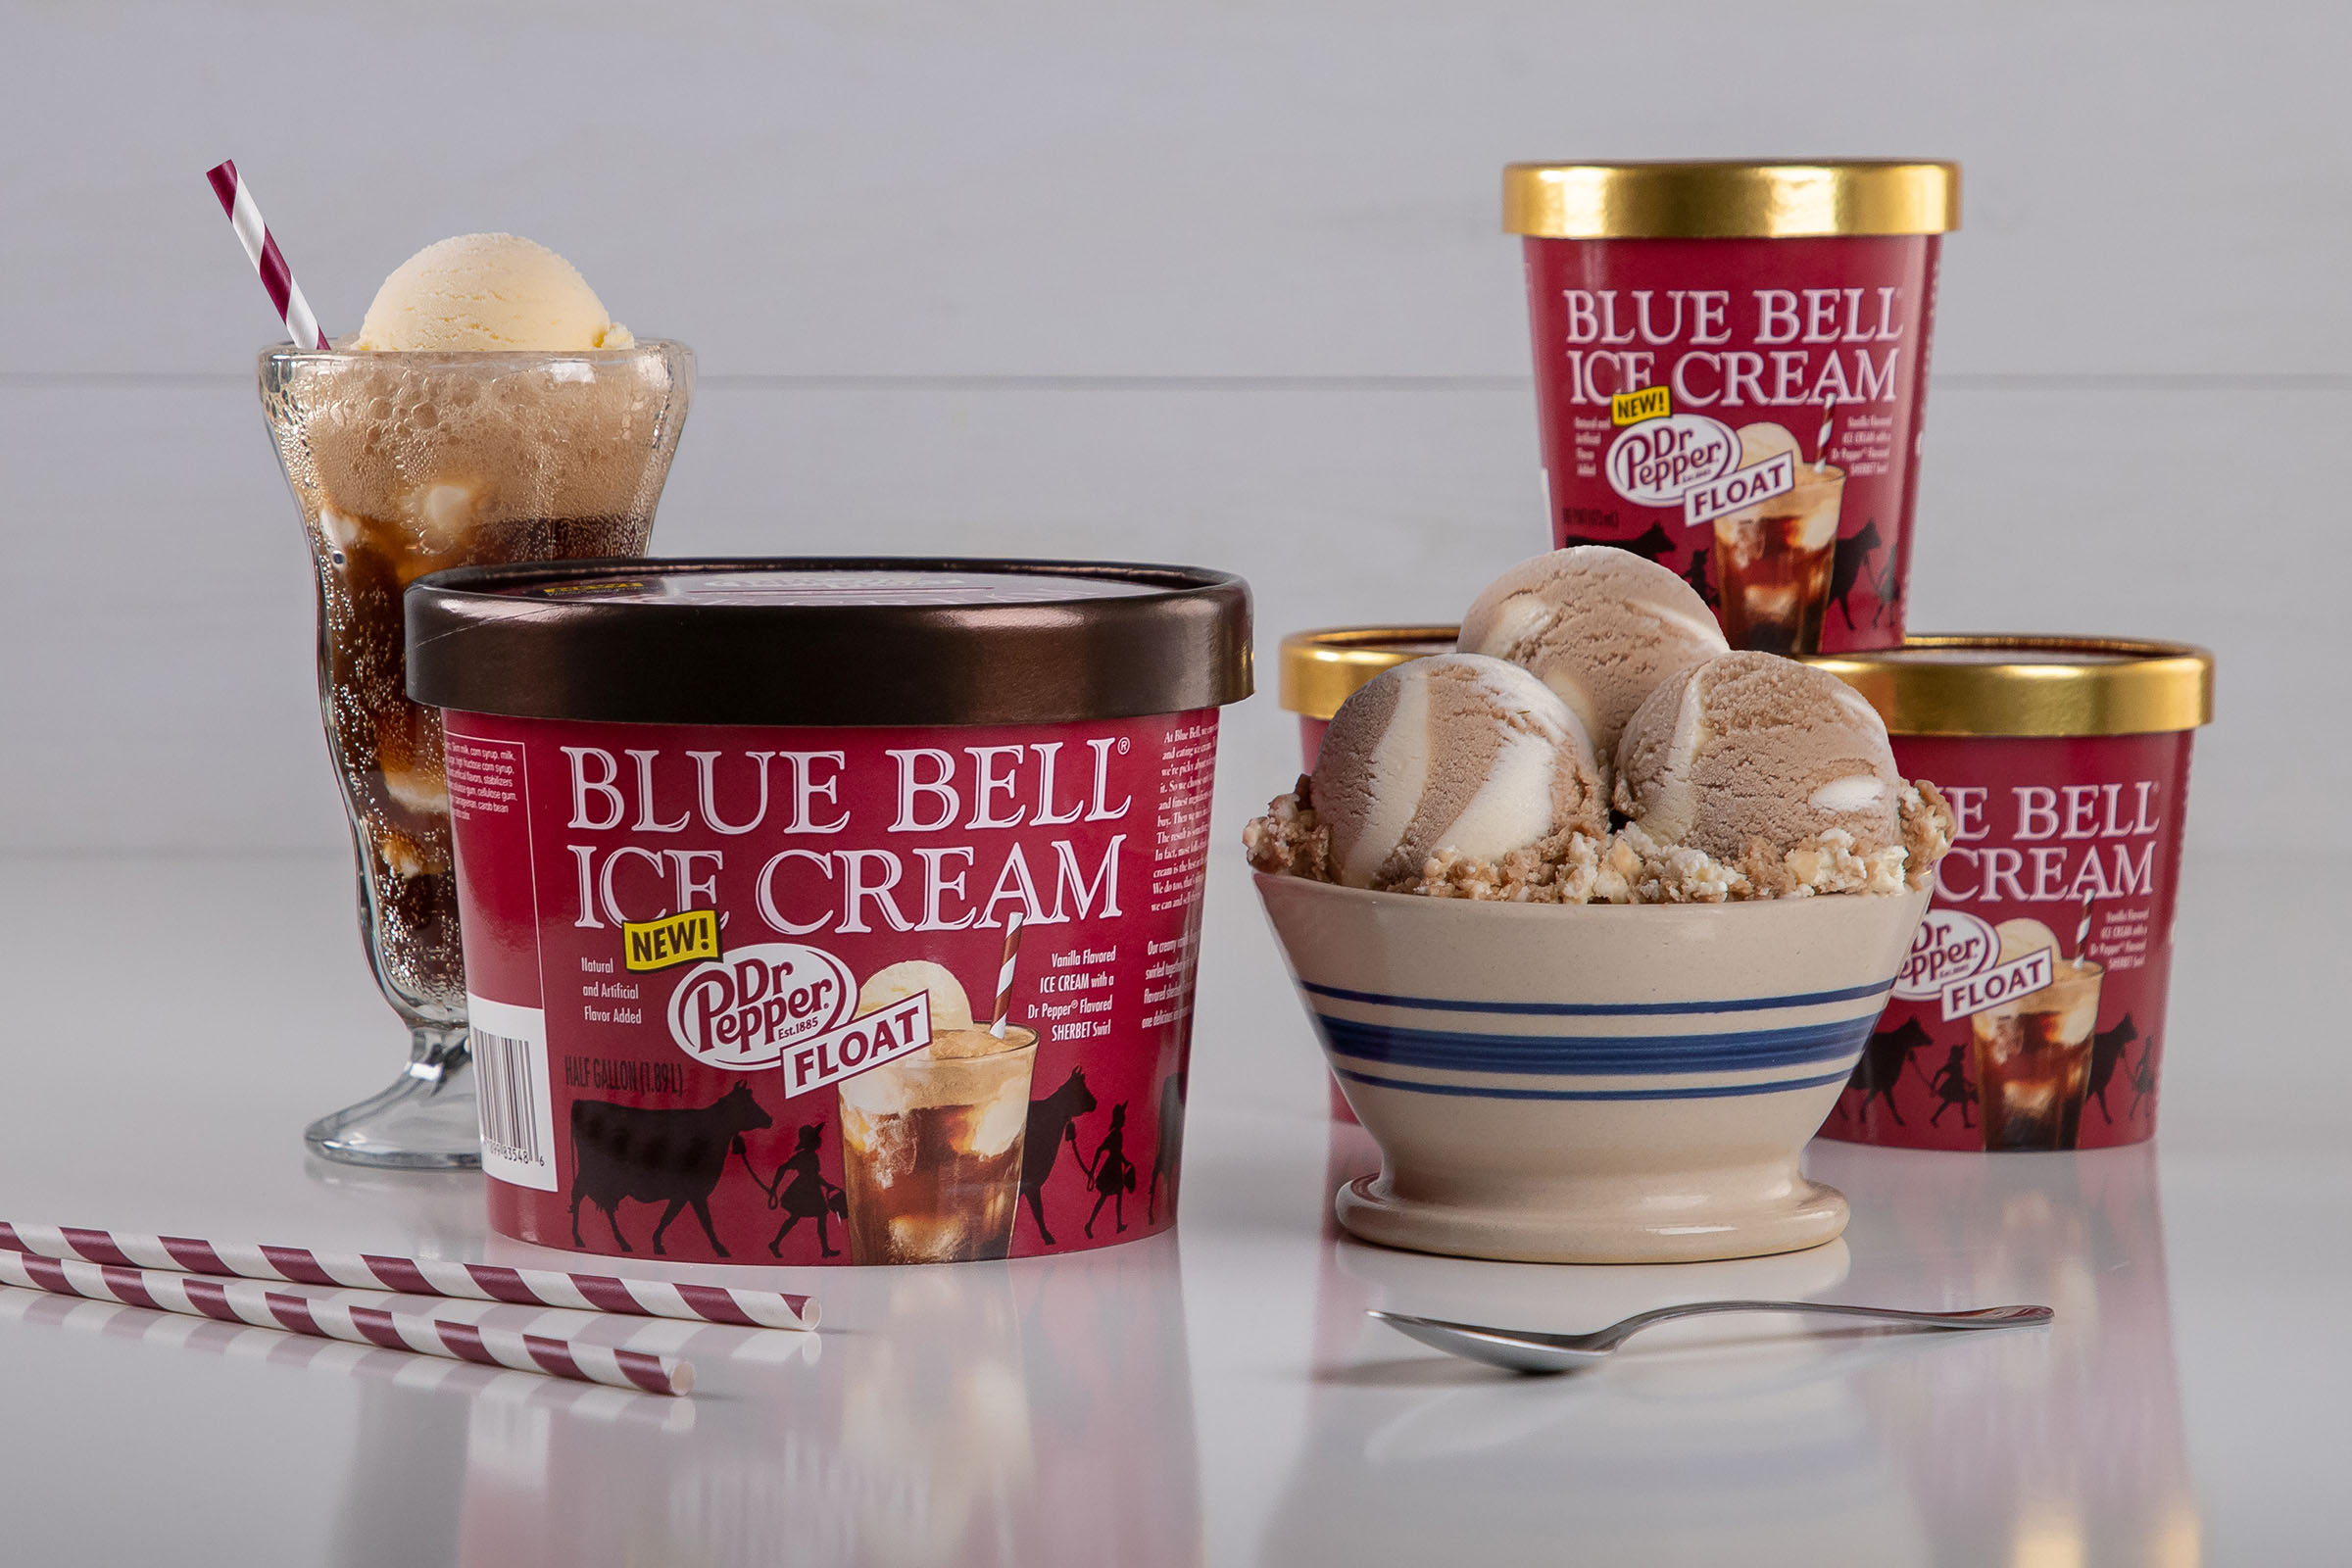 Containers of maroon Blue Bell ice cream and a ceramic bowl filled with scoops of Blue Bell